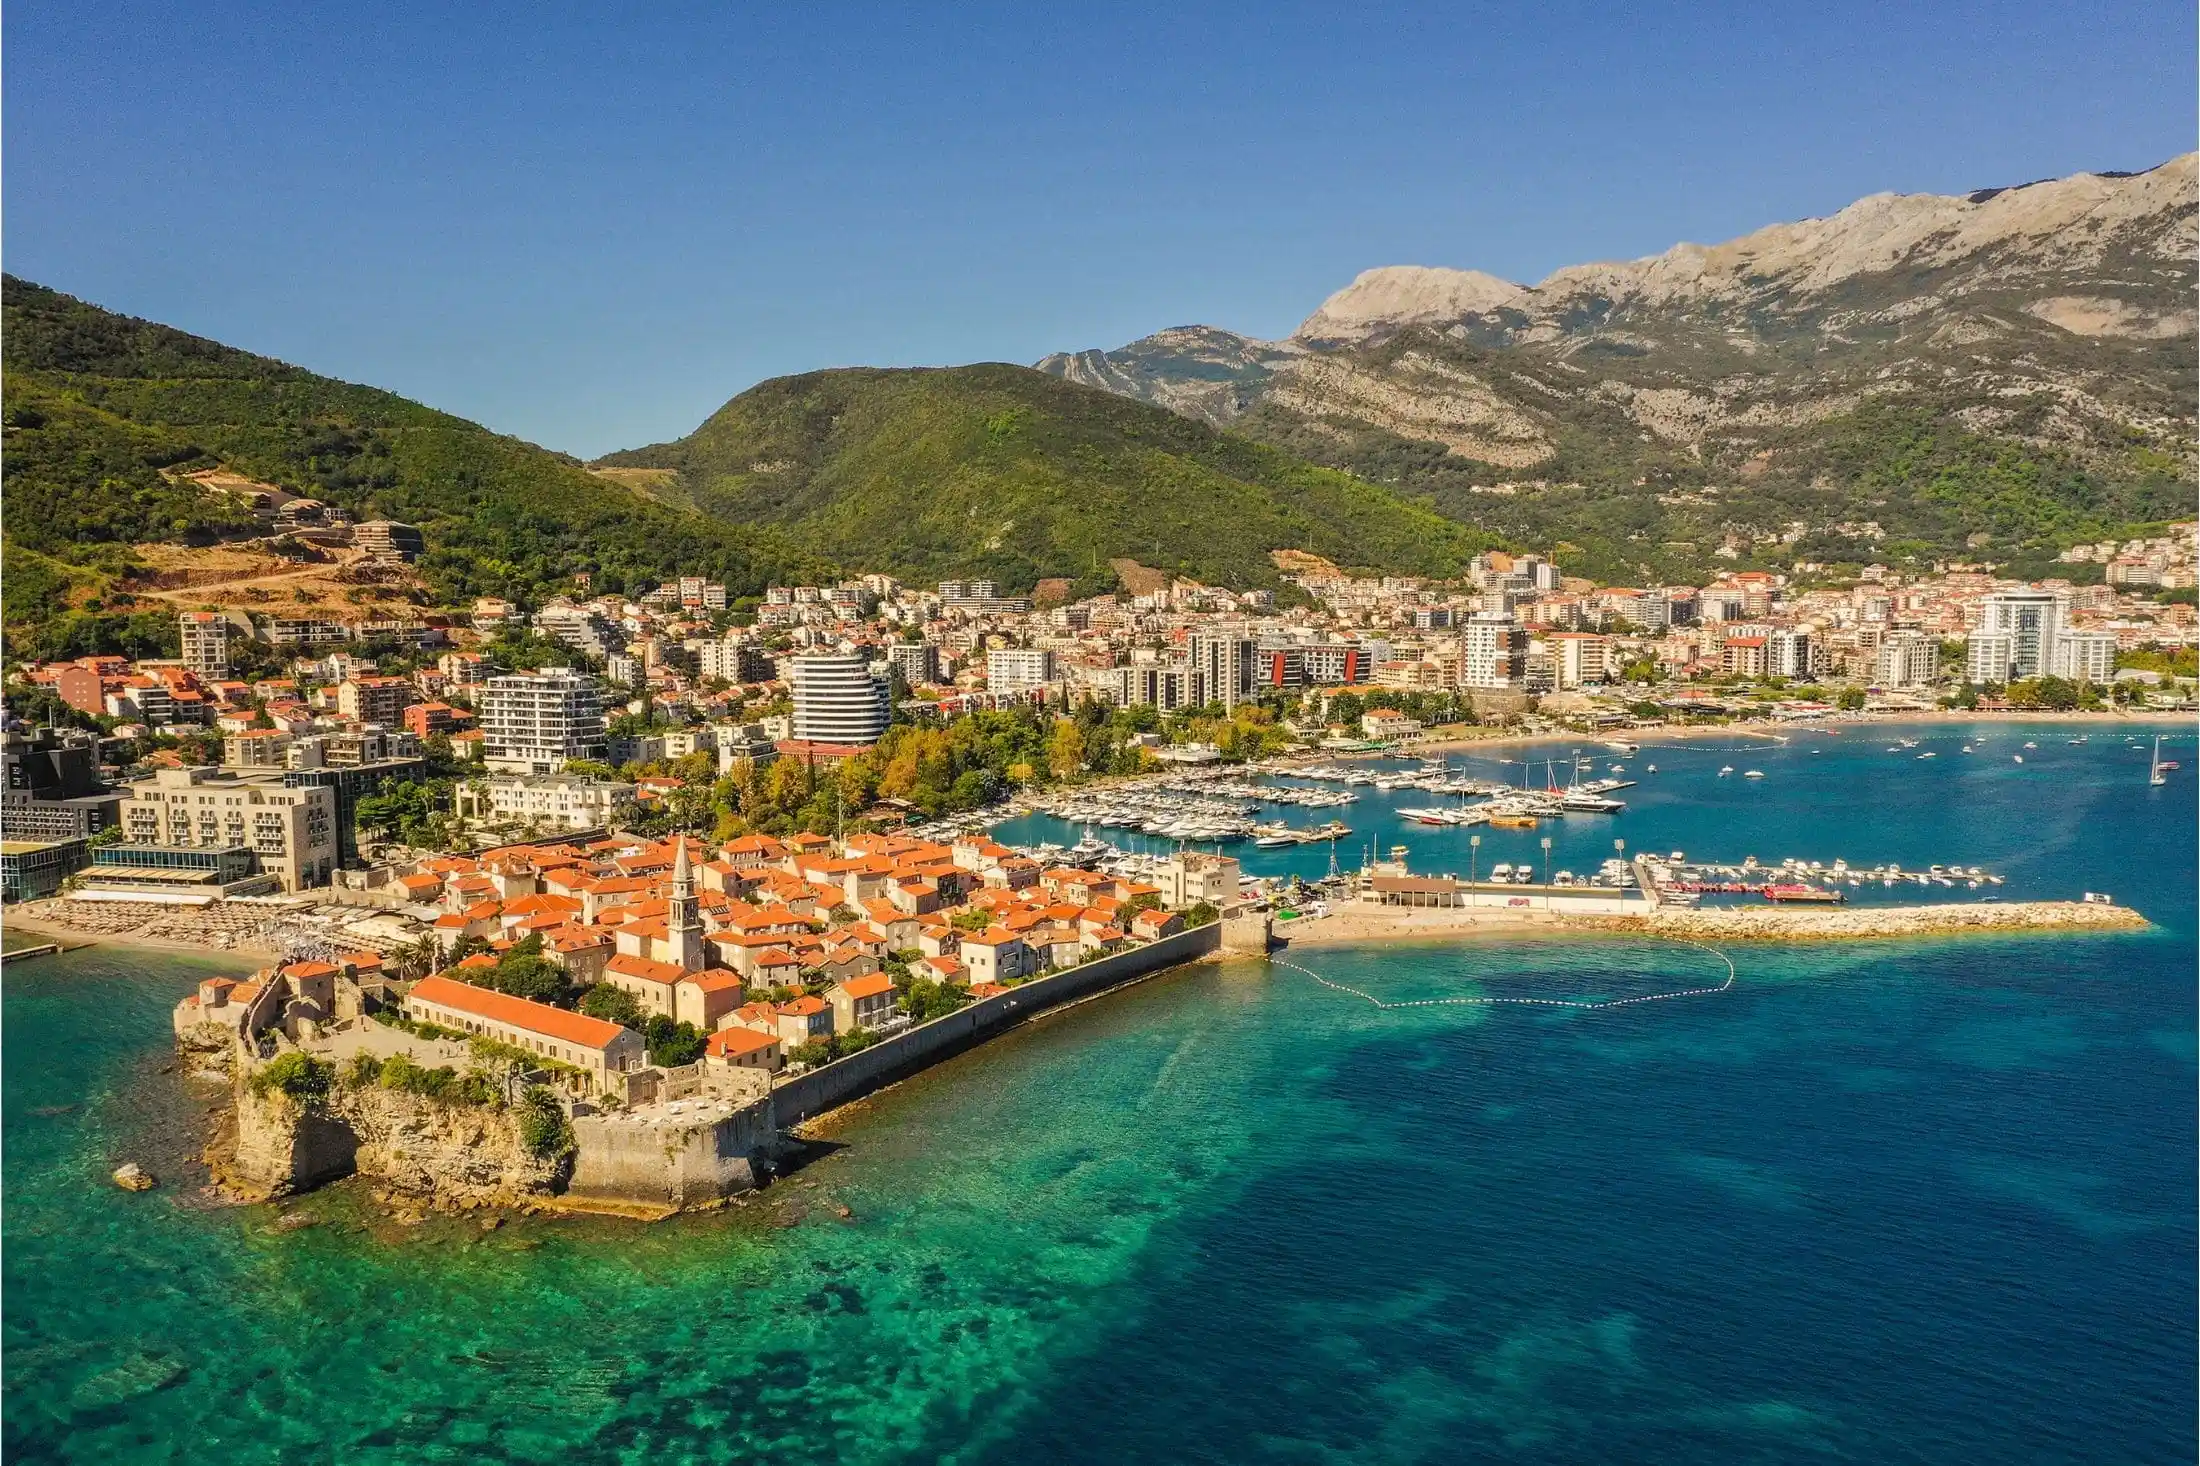 A photo of Budva and its Old Town